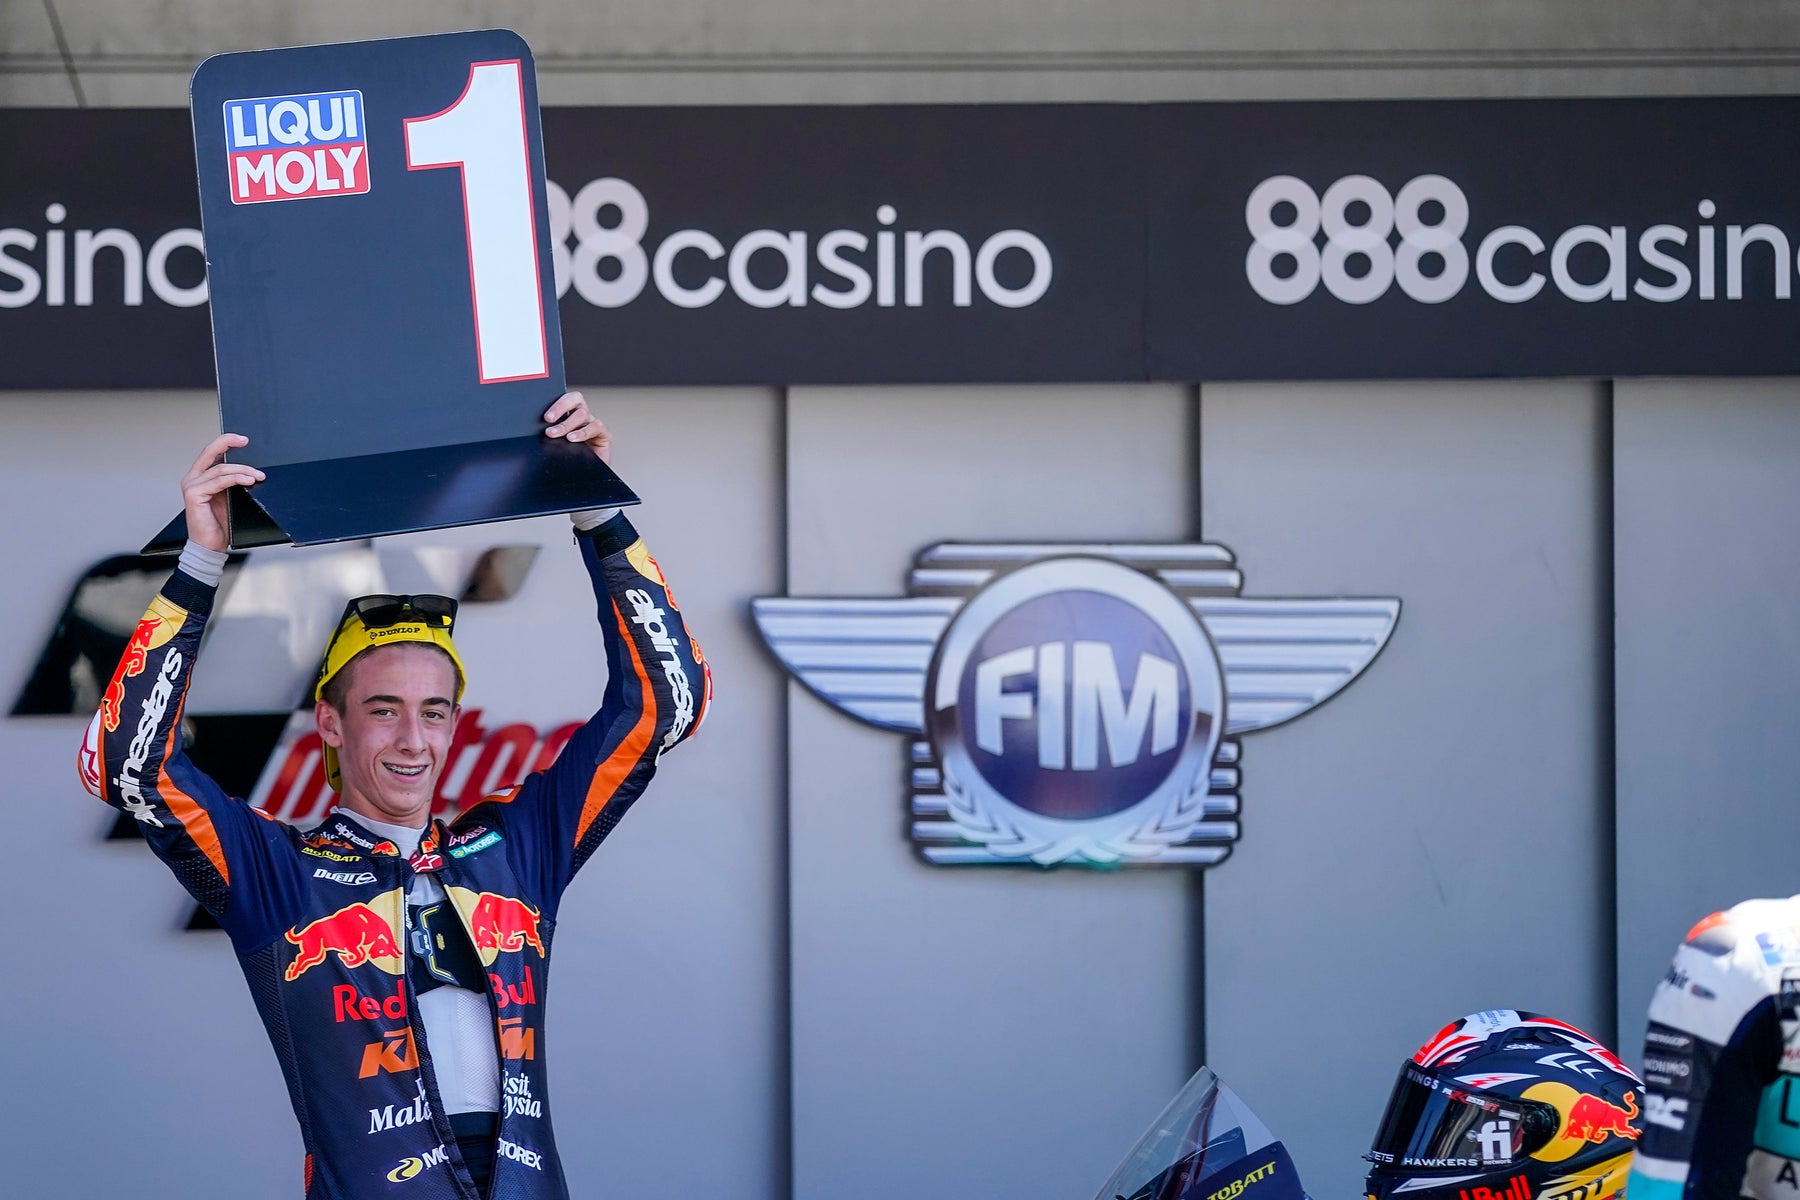 PEDRO ACOSTA SECURES SENSATIONAL MOTO3 VICTORY WITH PERFECTLY EXECUTED LAST LAP PASS AT PORTIMAO